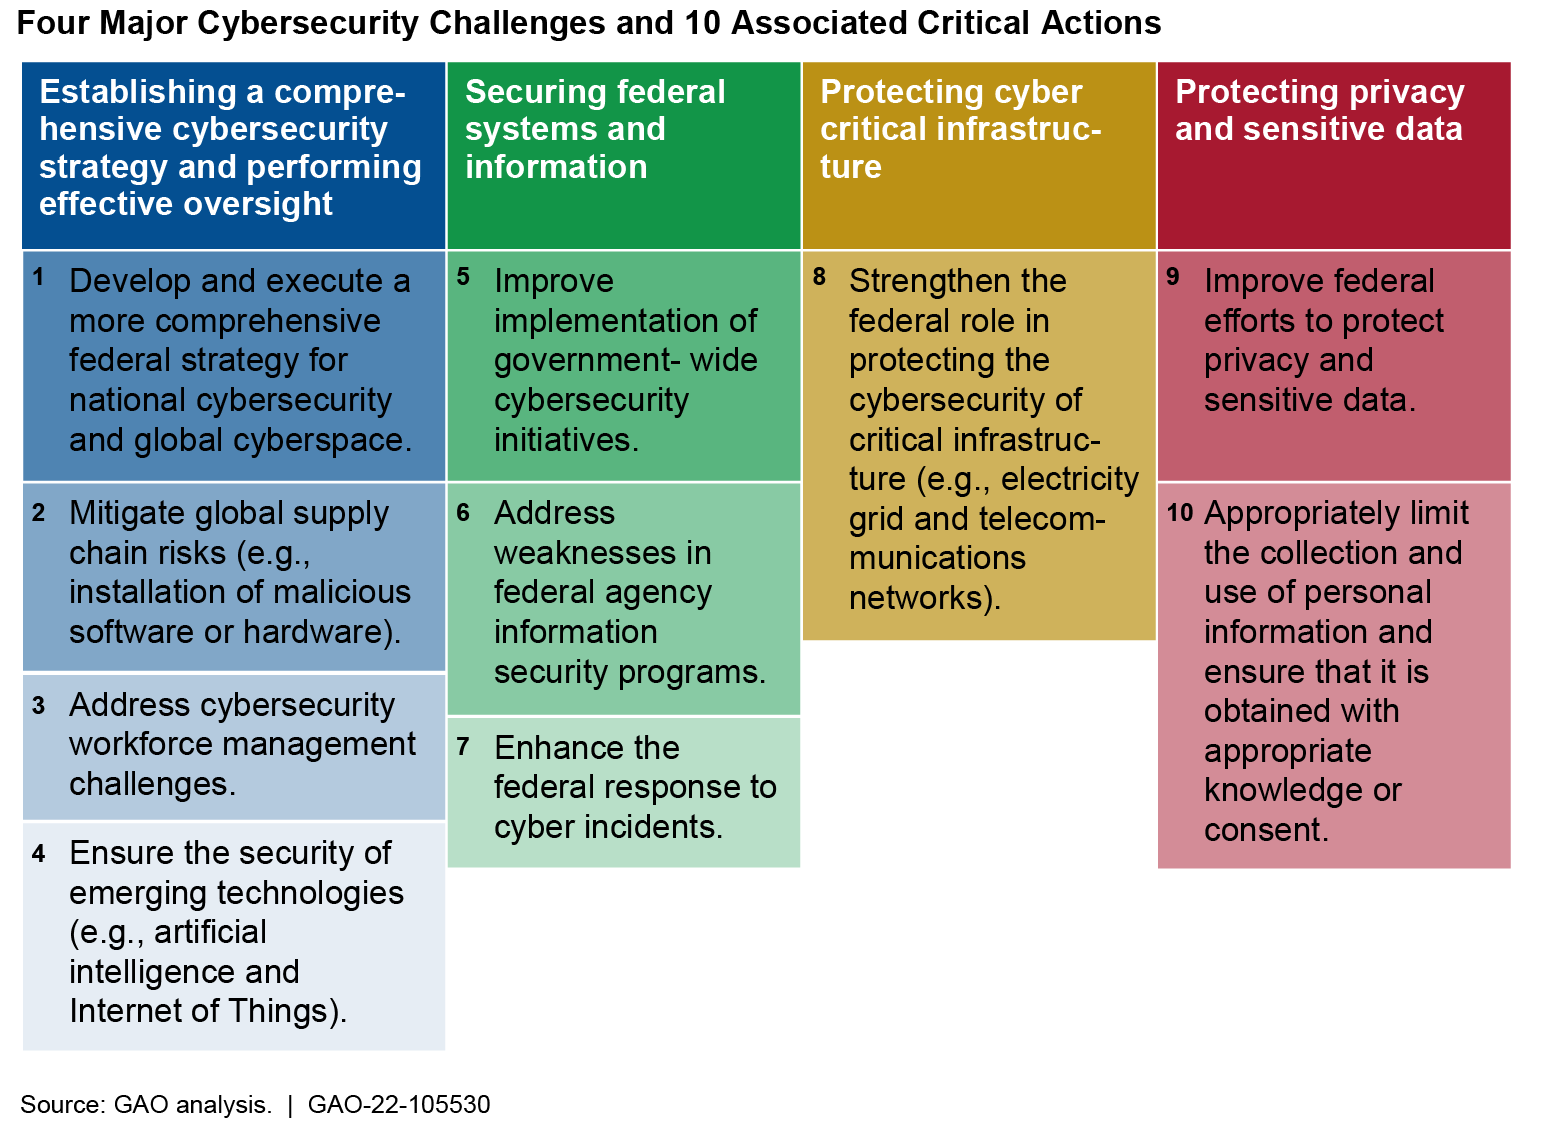 Cybersecurity challenges